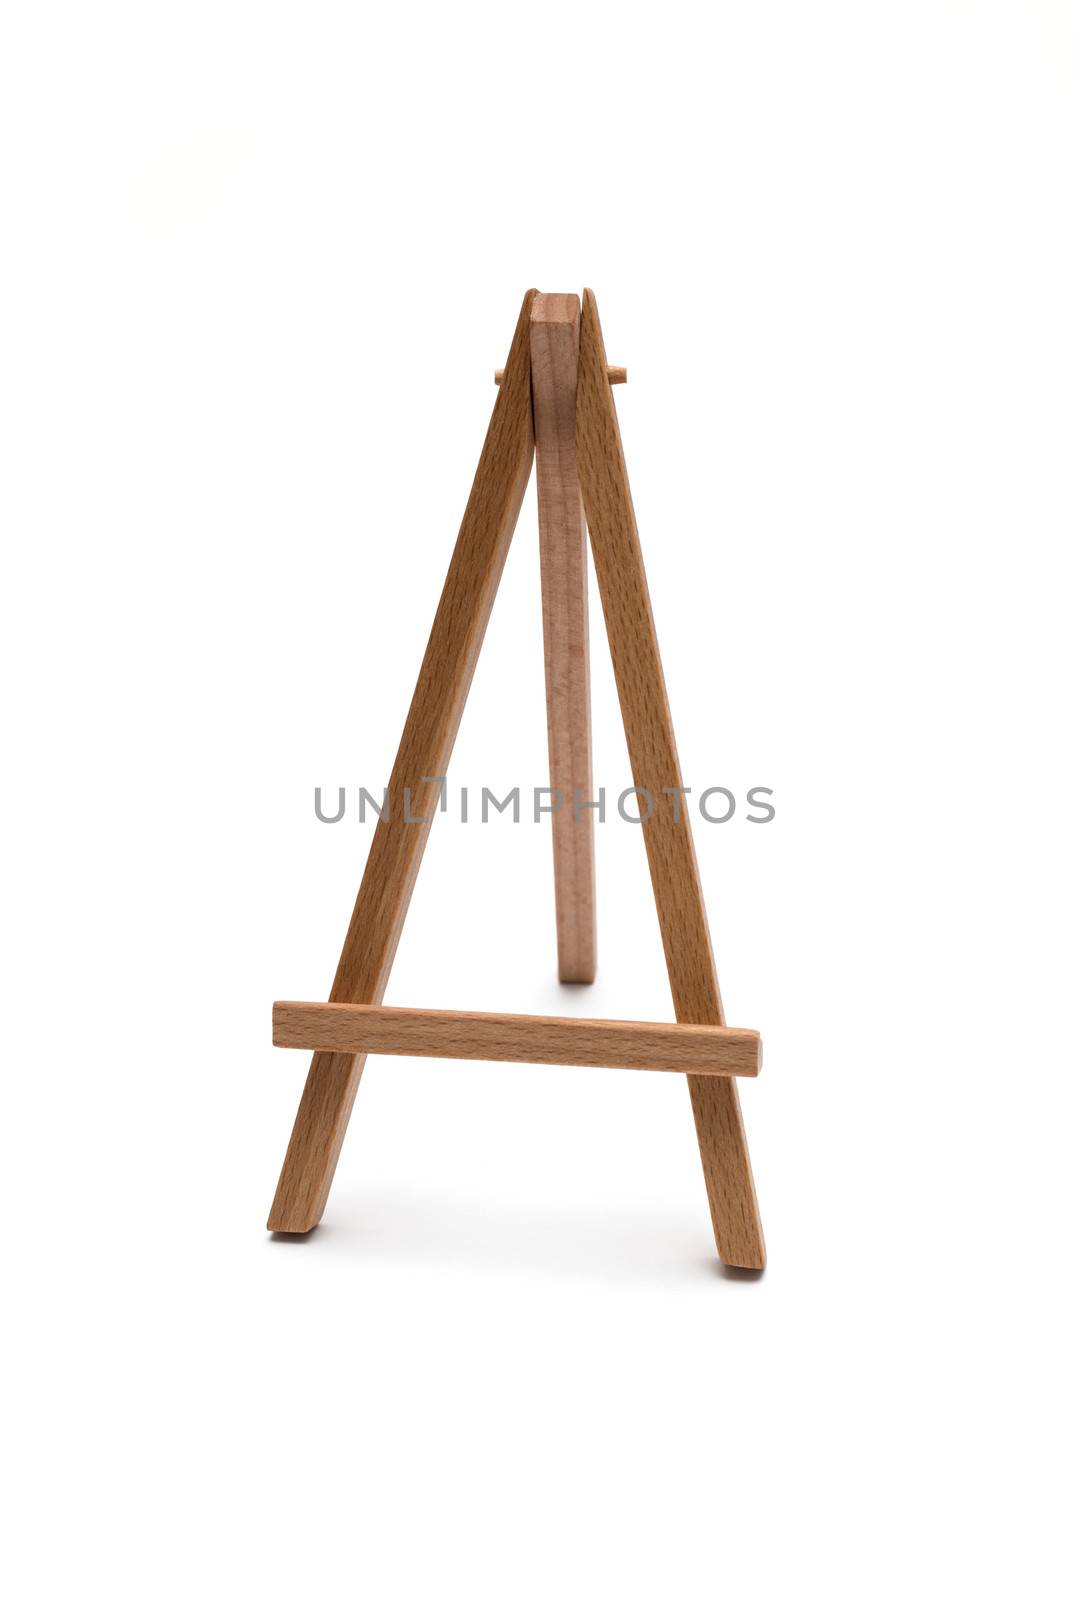 small easel on a white background